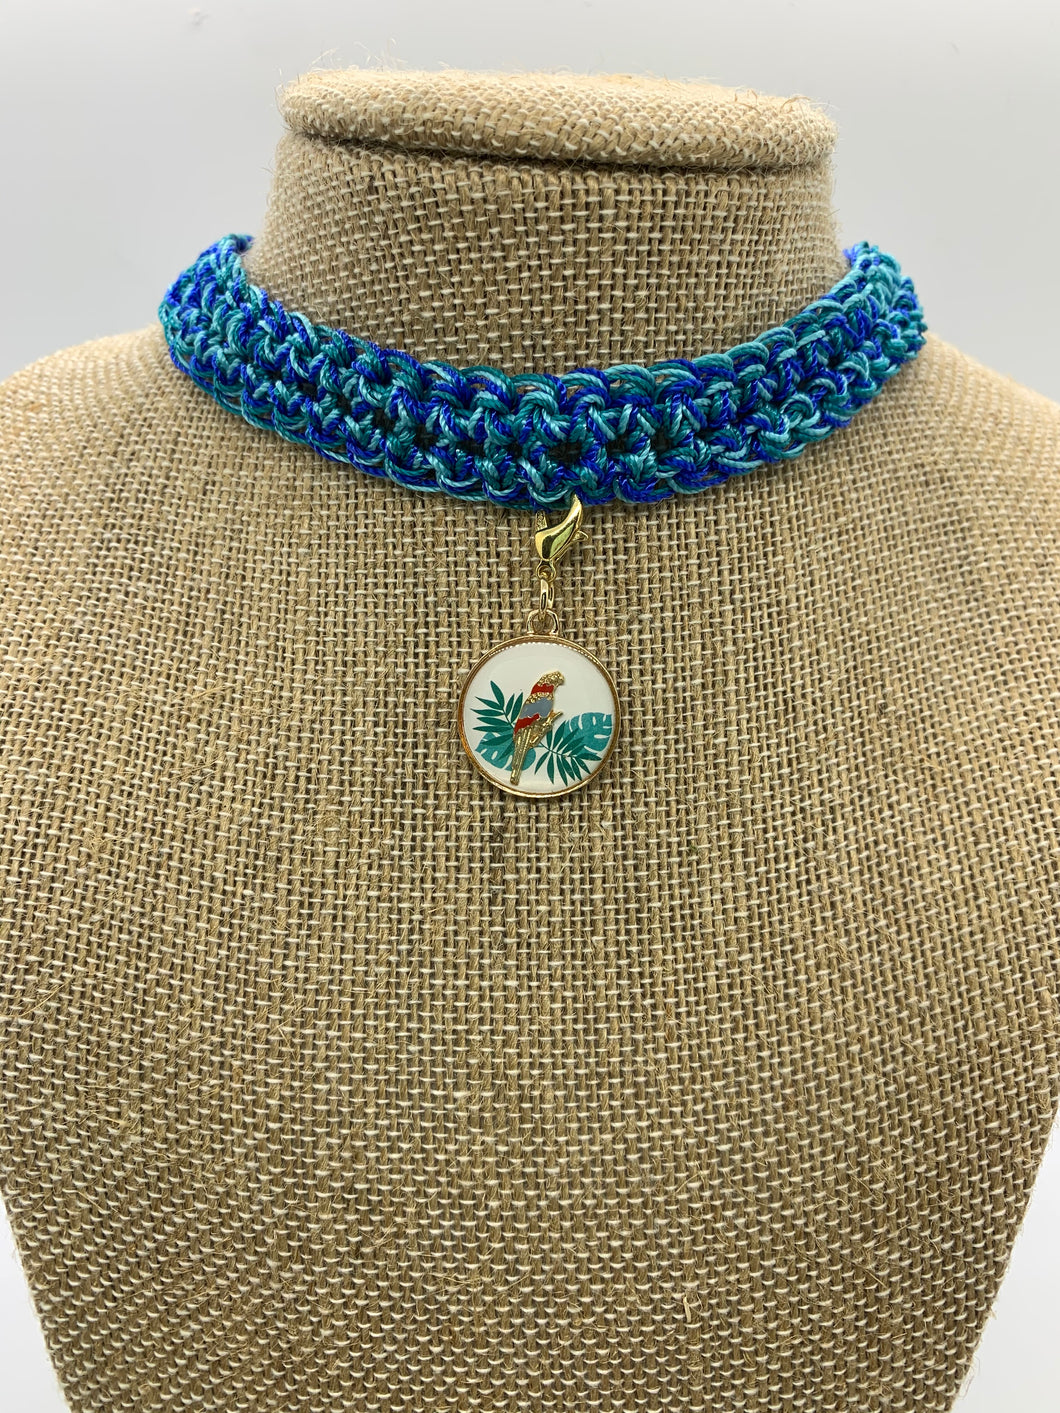 Sea Blue Necklace Choker With Pendant